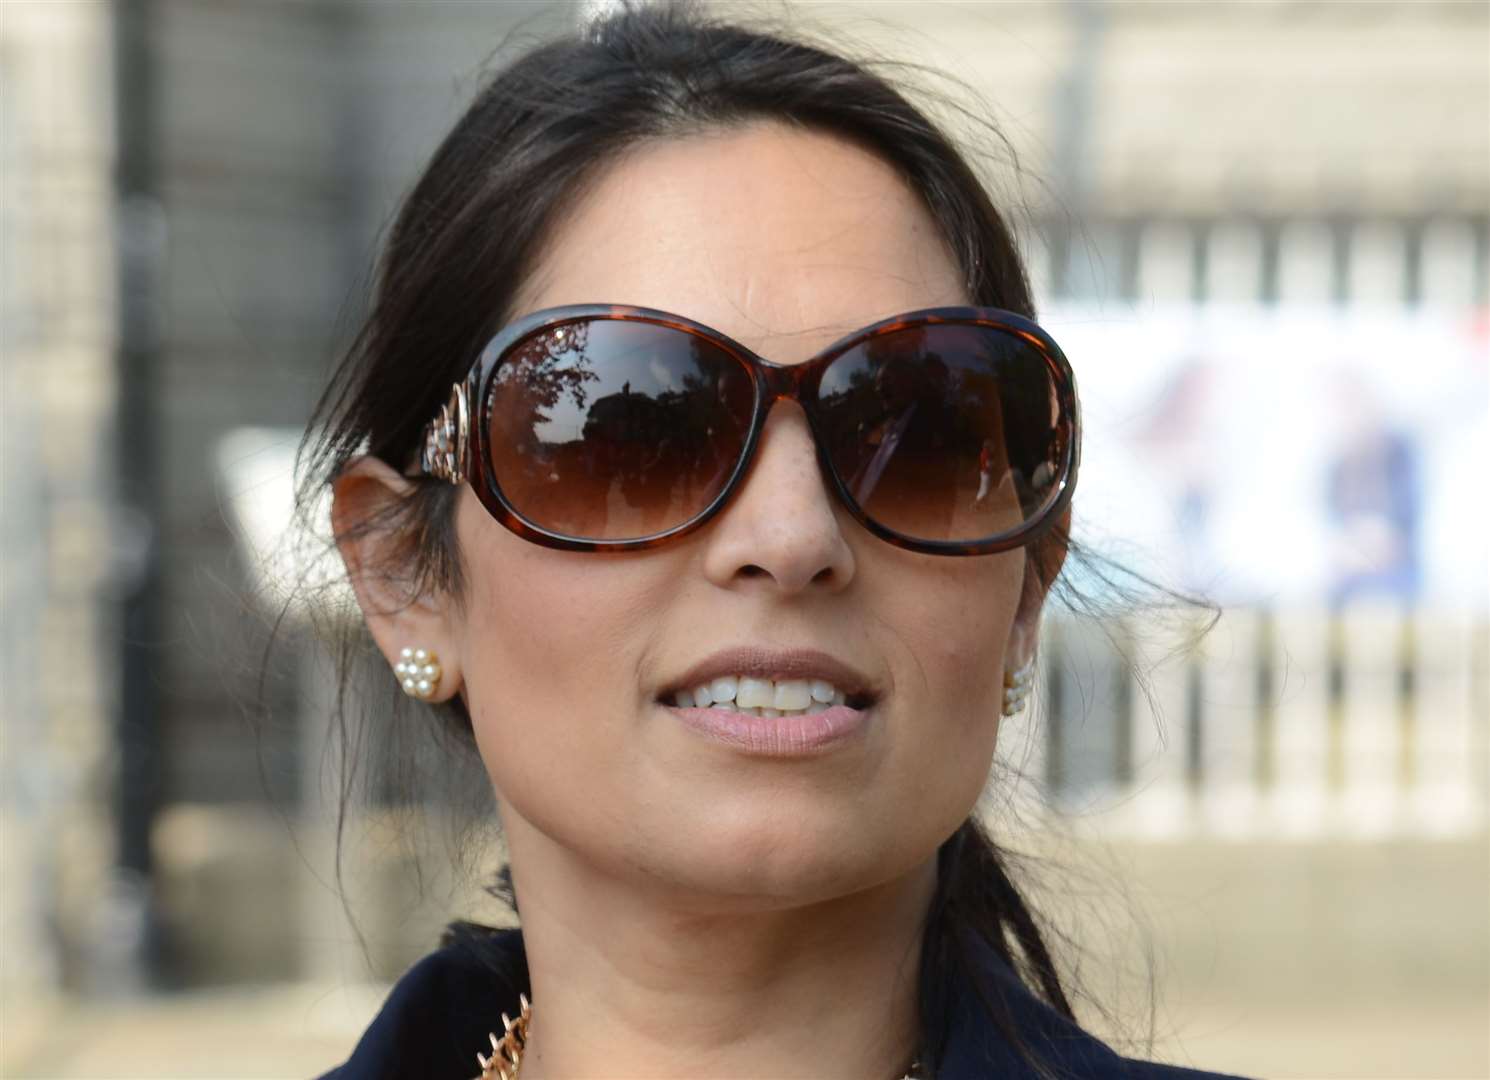 Questions have been asked of Home Secretary Priti Patel